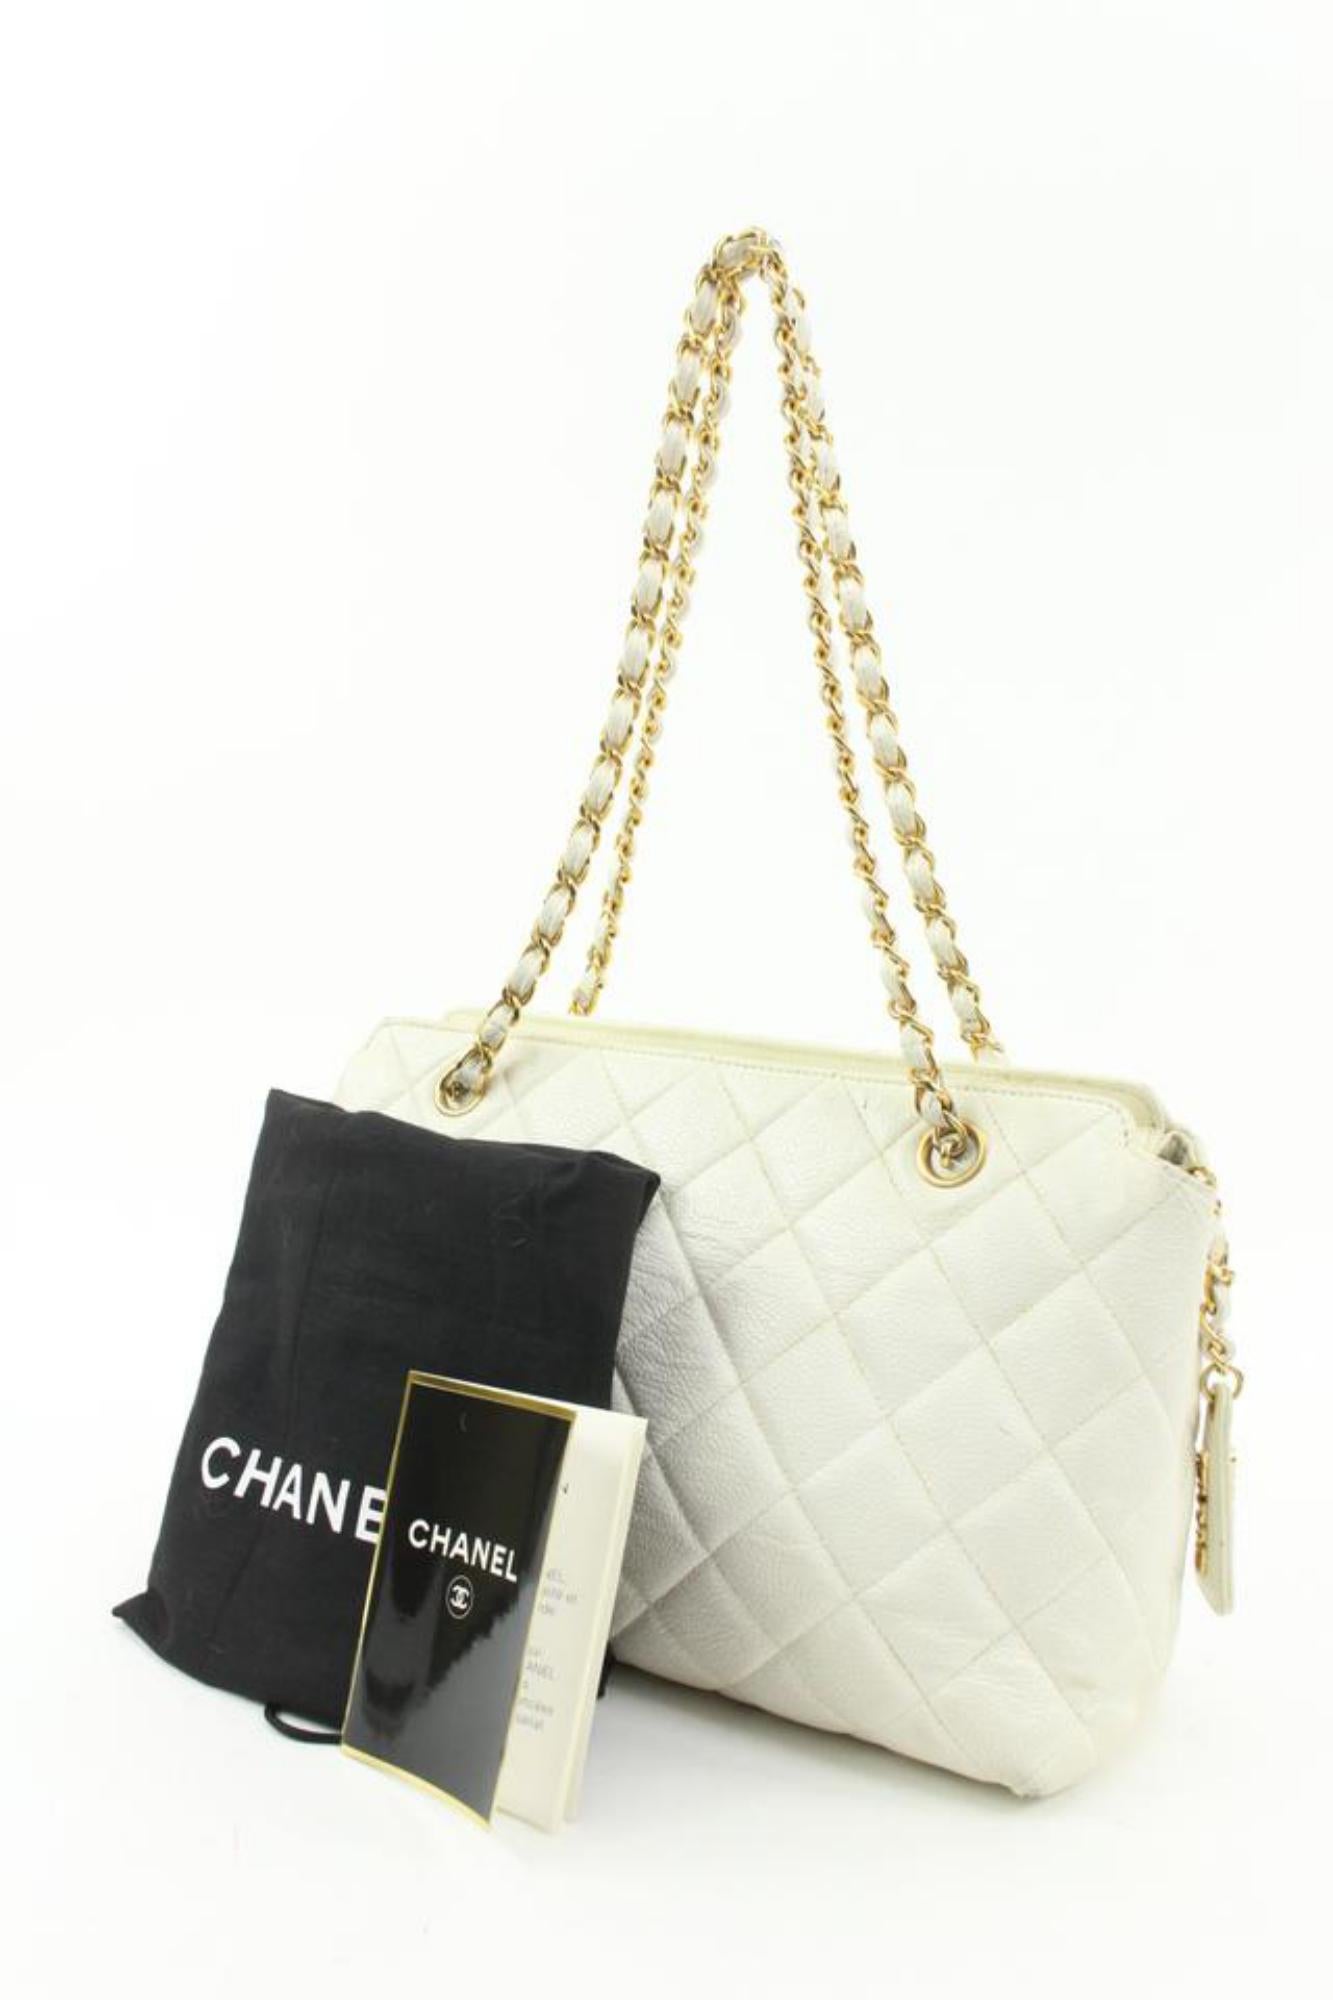 Chanel White Quilted Caviar Gold Chain Shoulder Bag 6ca516 For Sale 6